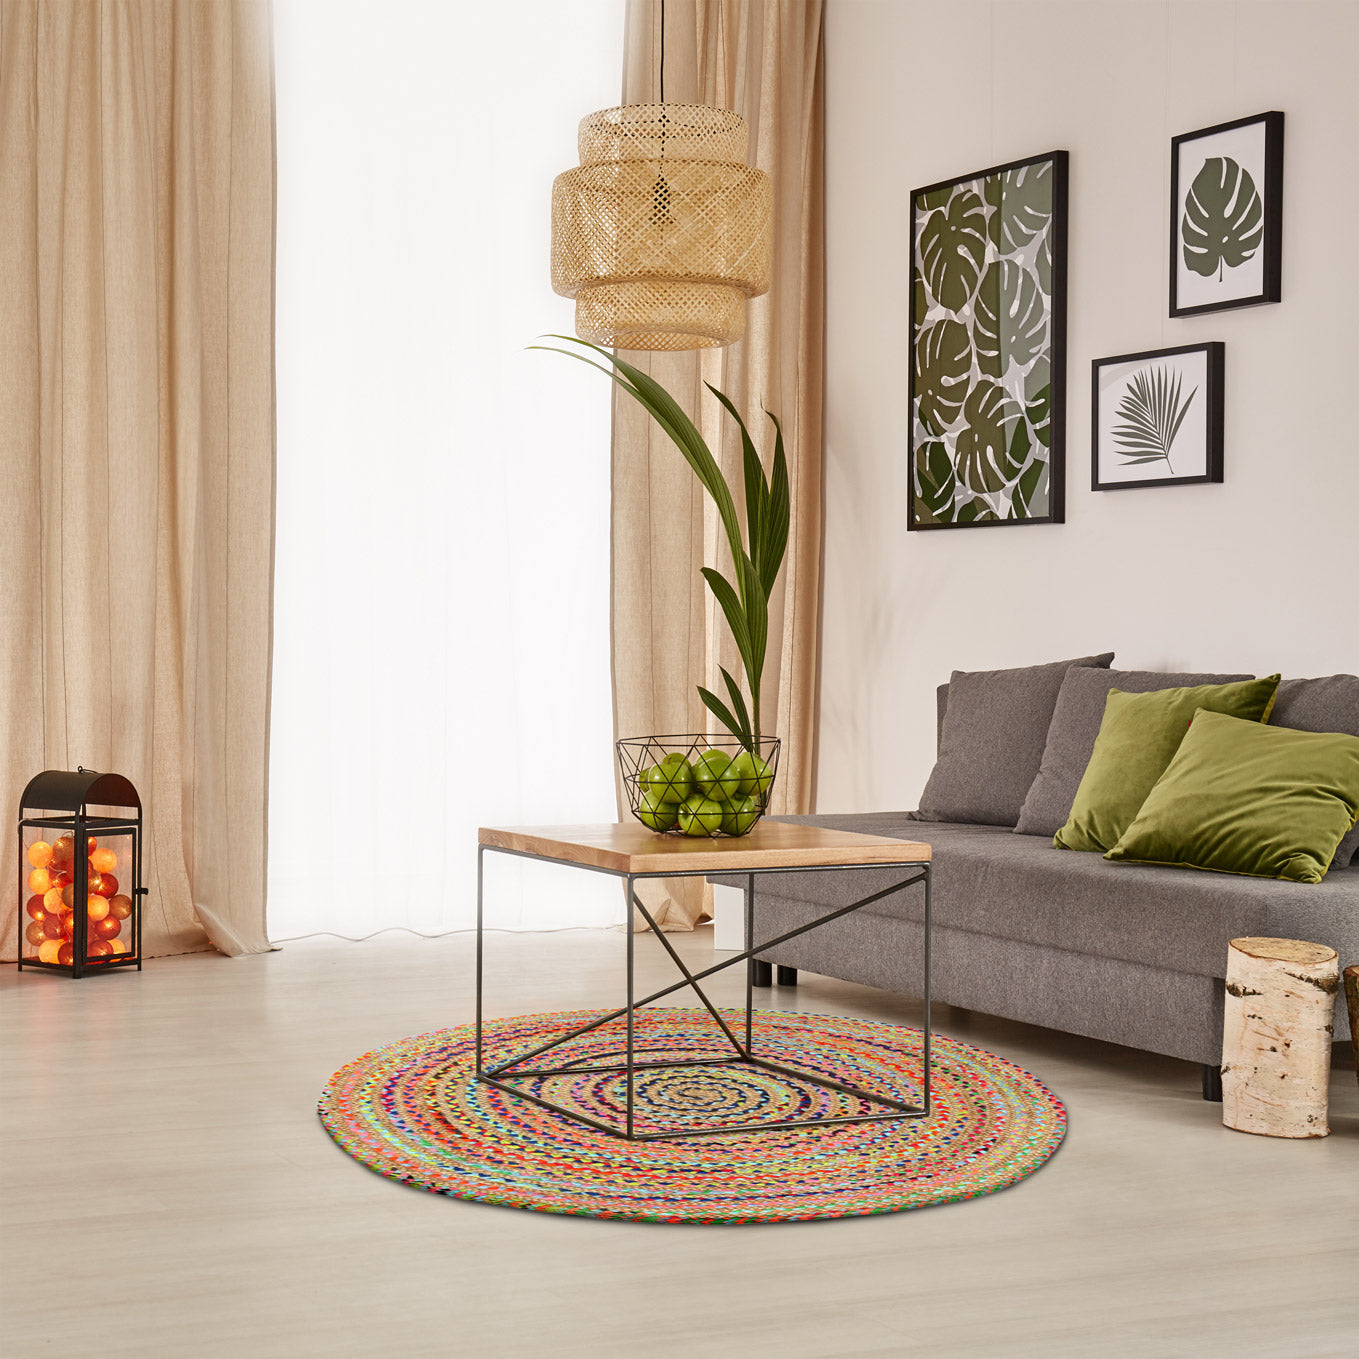 Fusion Handwoven Round Natural Jute Rug